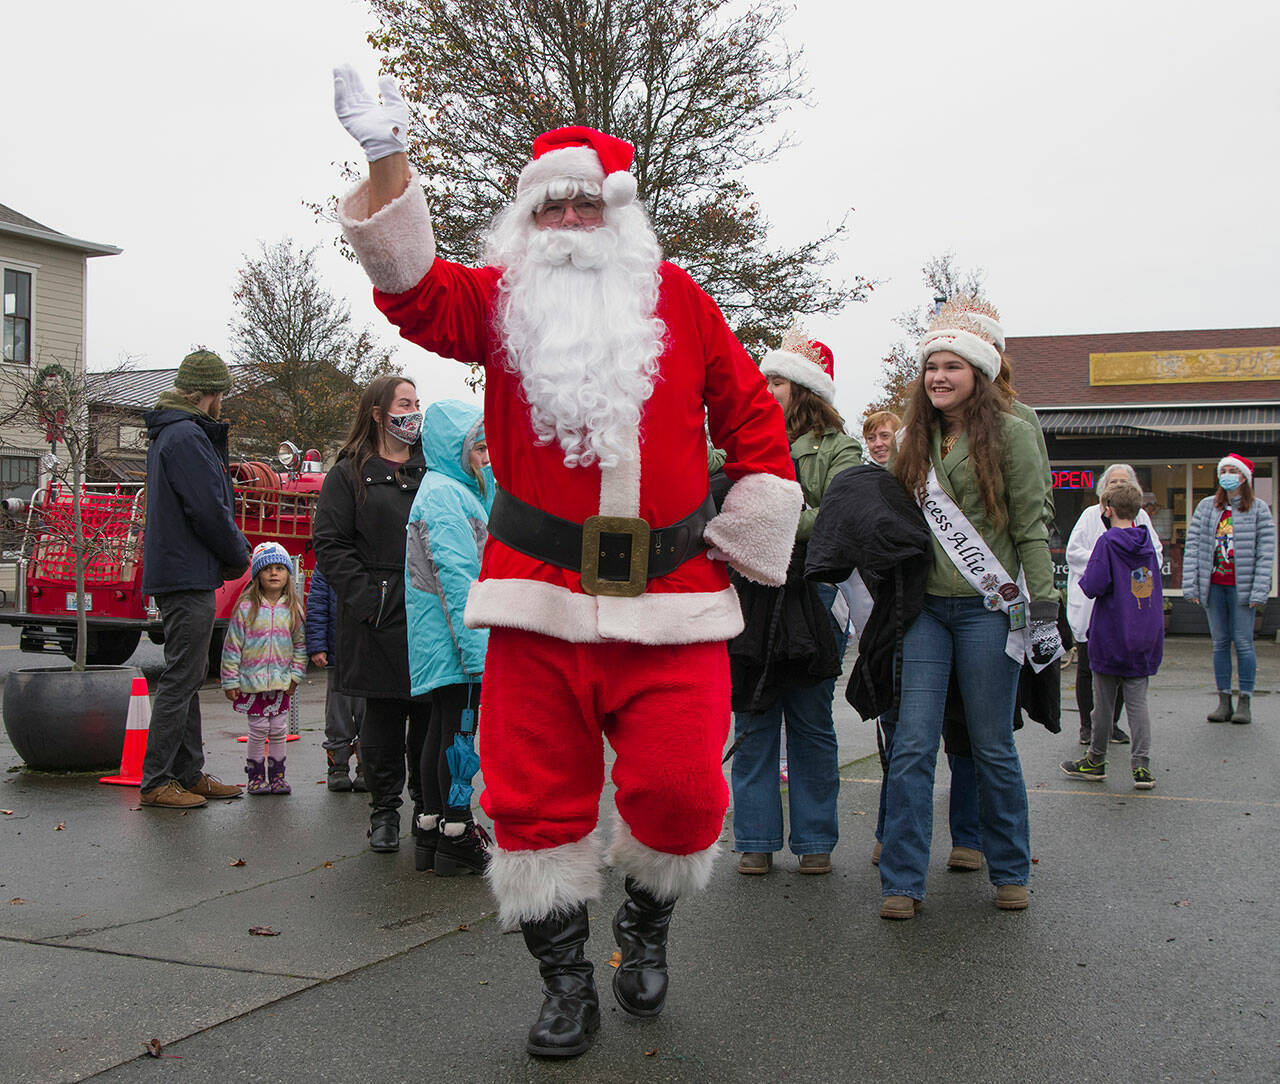 Santa waves at the people in Centennial Square after disembarking an antique firetruck with Sequim Irrigation Festival Royalty. Seen behind him is Princess Allie Gale. Sequim Gazette photo by Emily Matthiessen